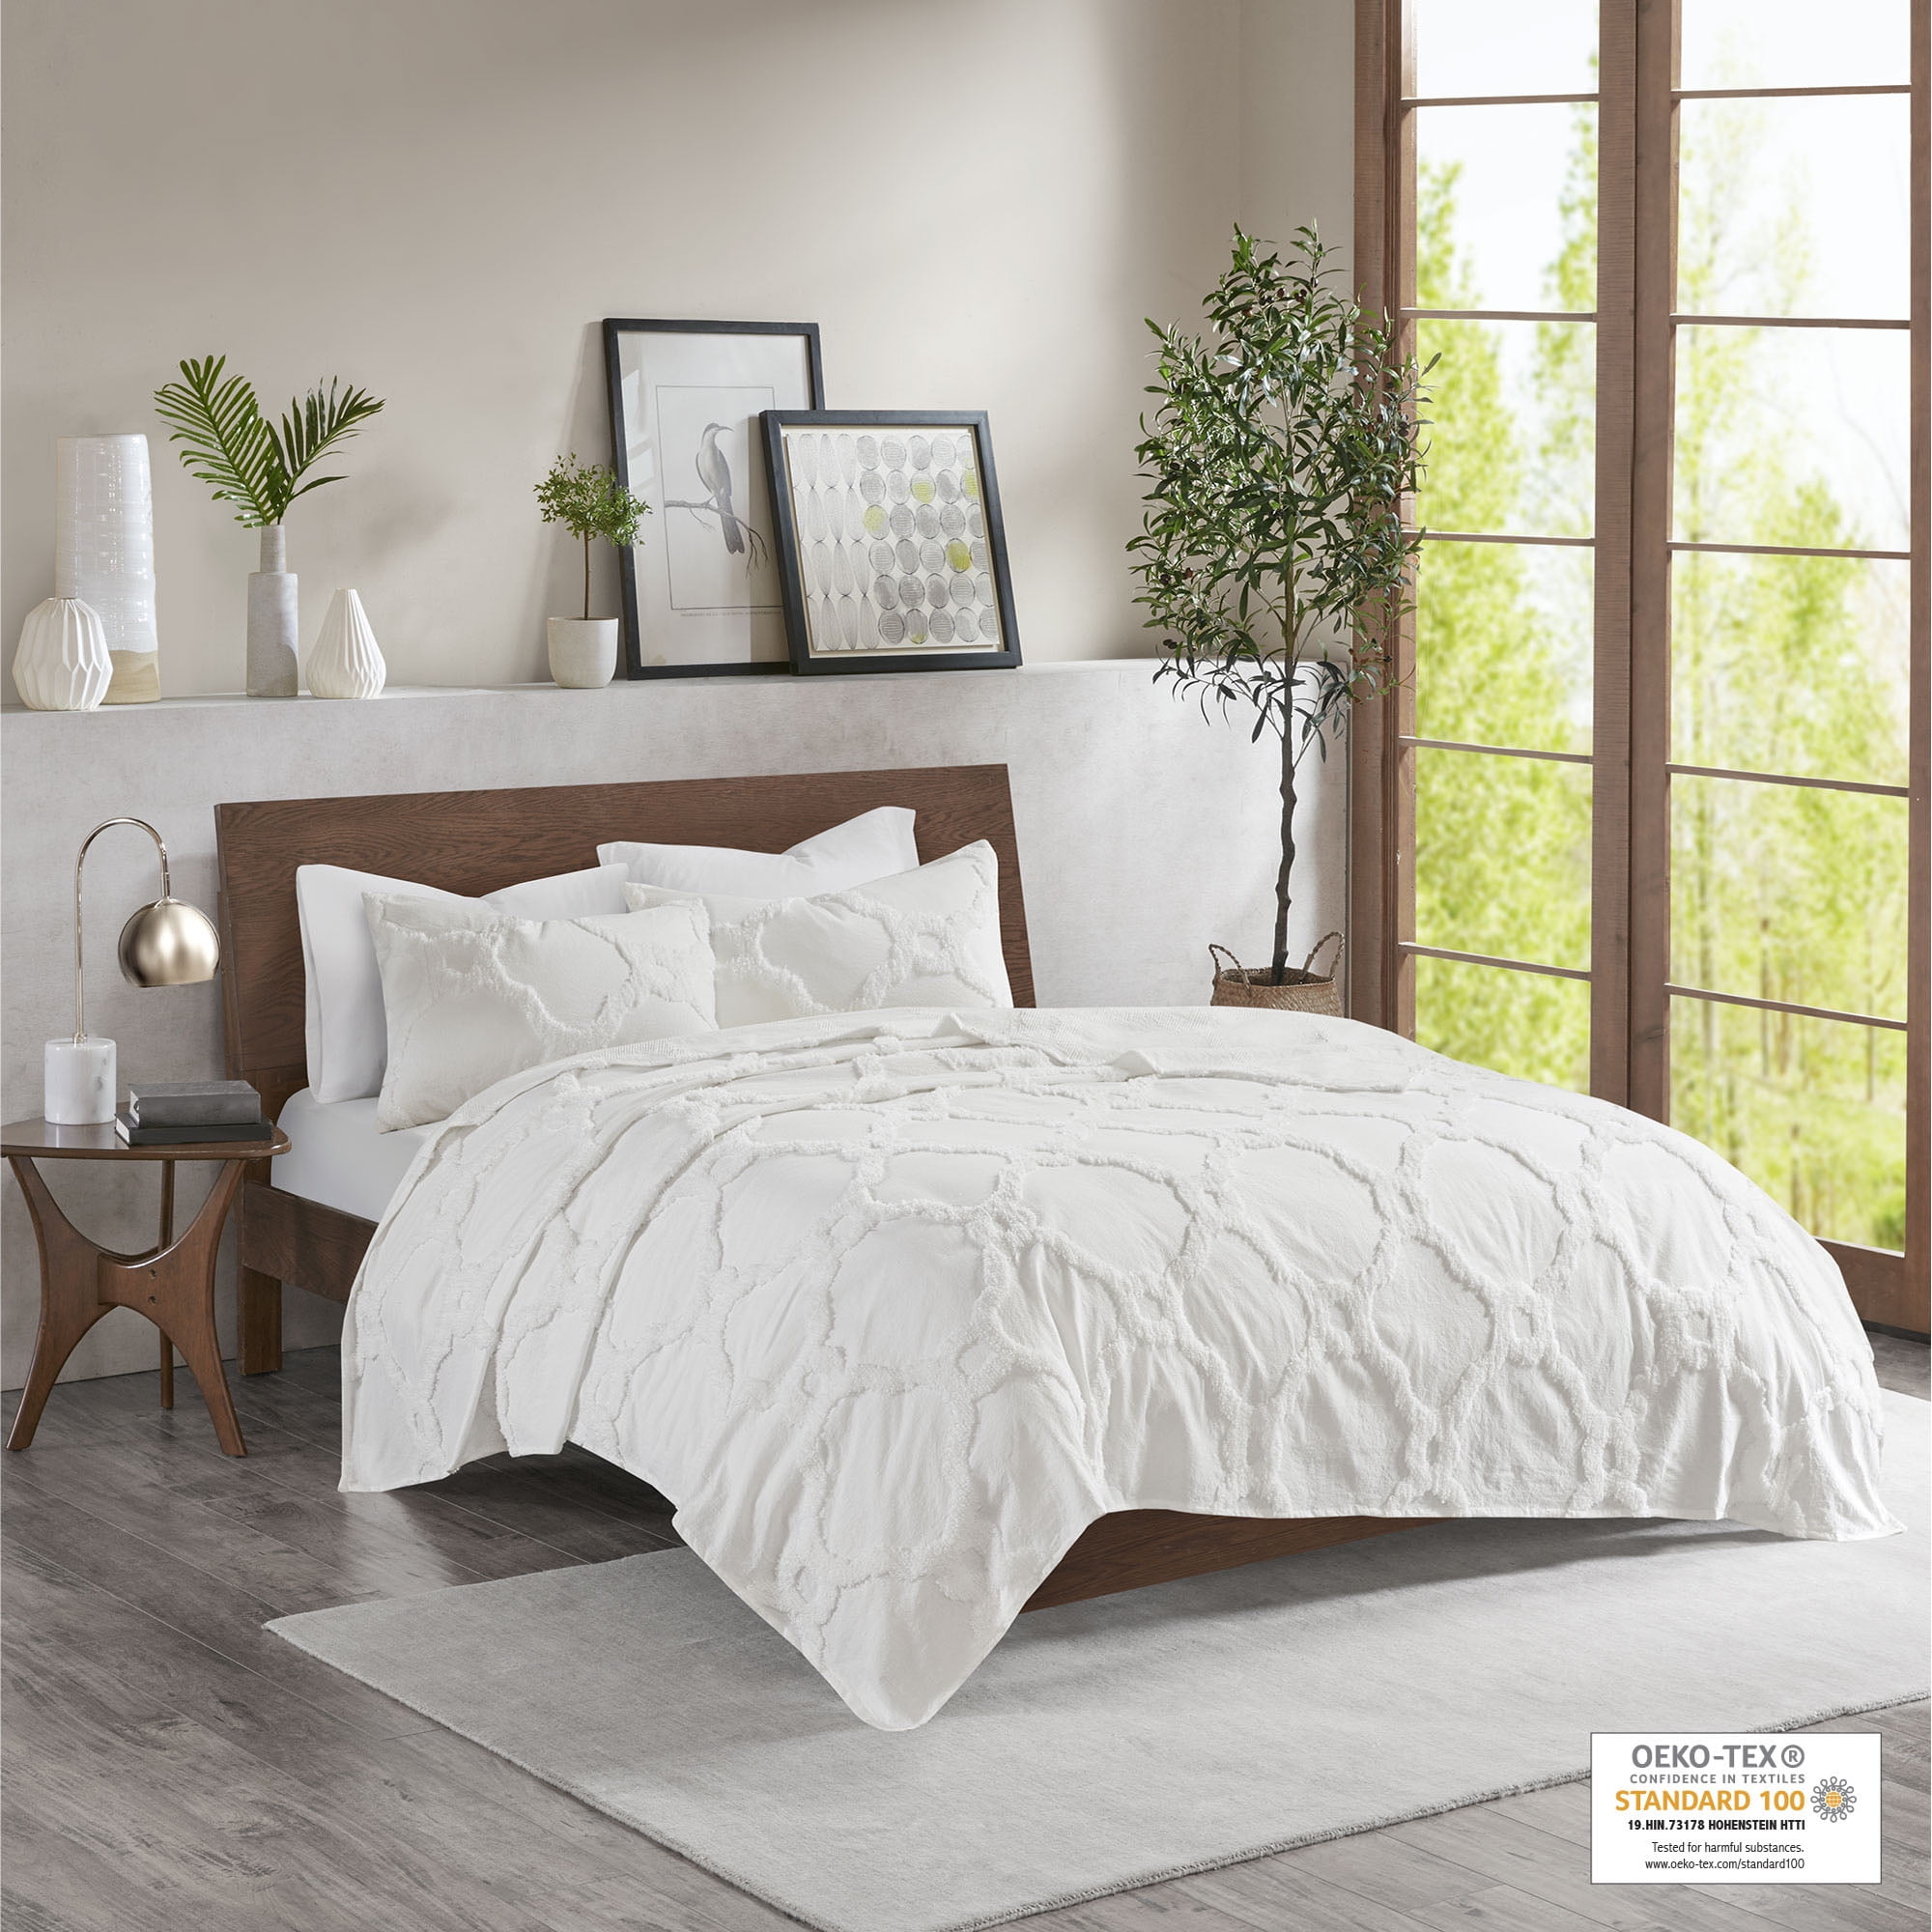 Home Essence Leena 3 Piece Tufted Cotton Coverlet Set, Full/Queen, White